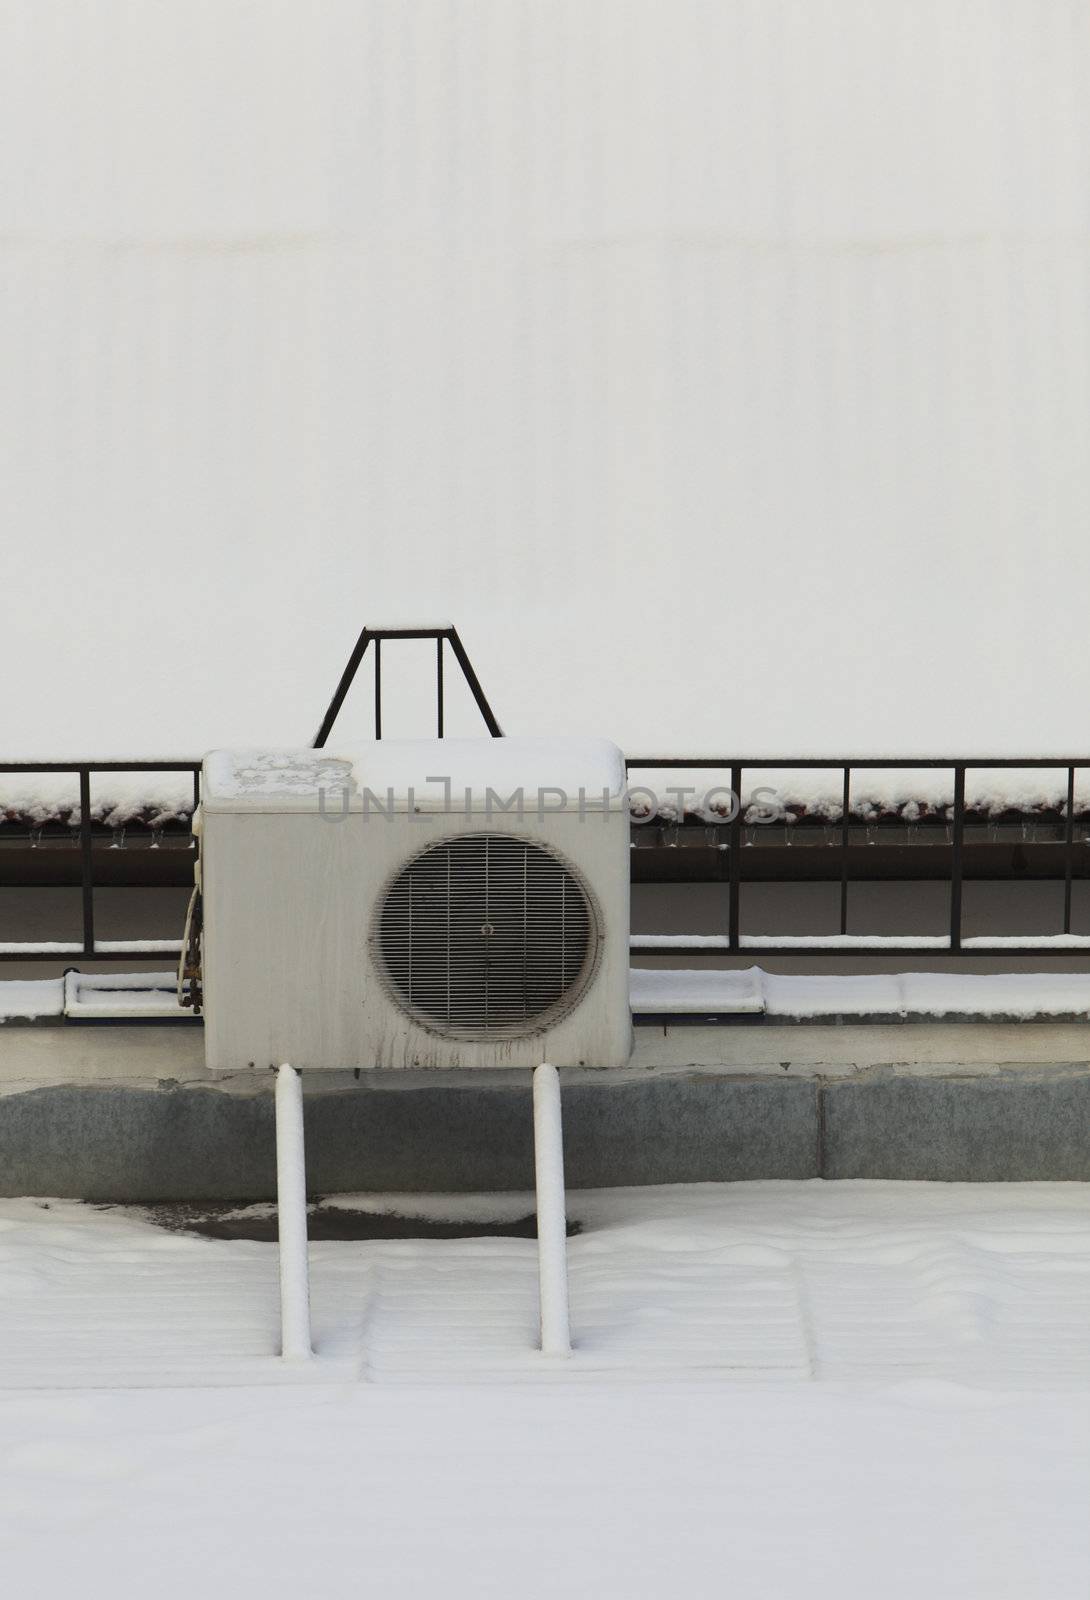 Image of an air conditioner machine on a roof of a building covered by snow.